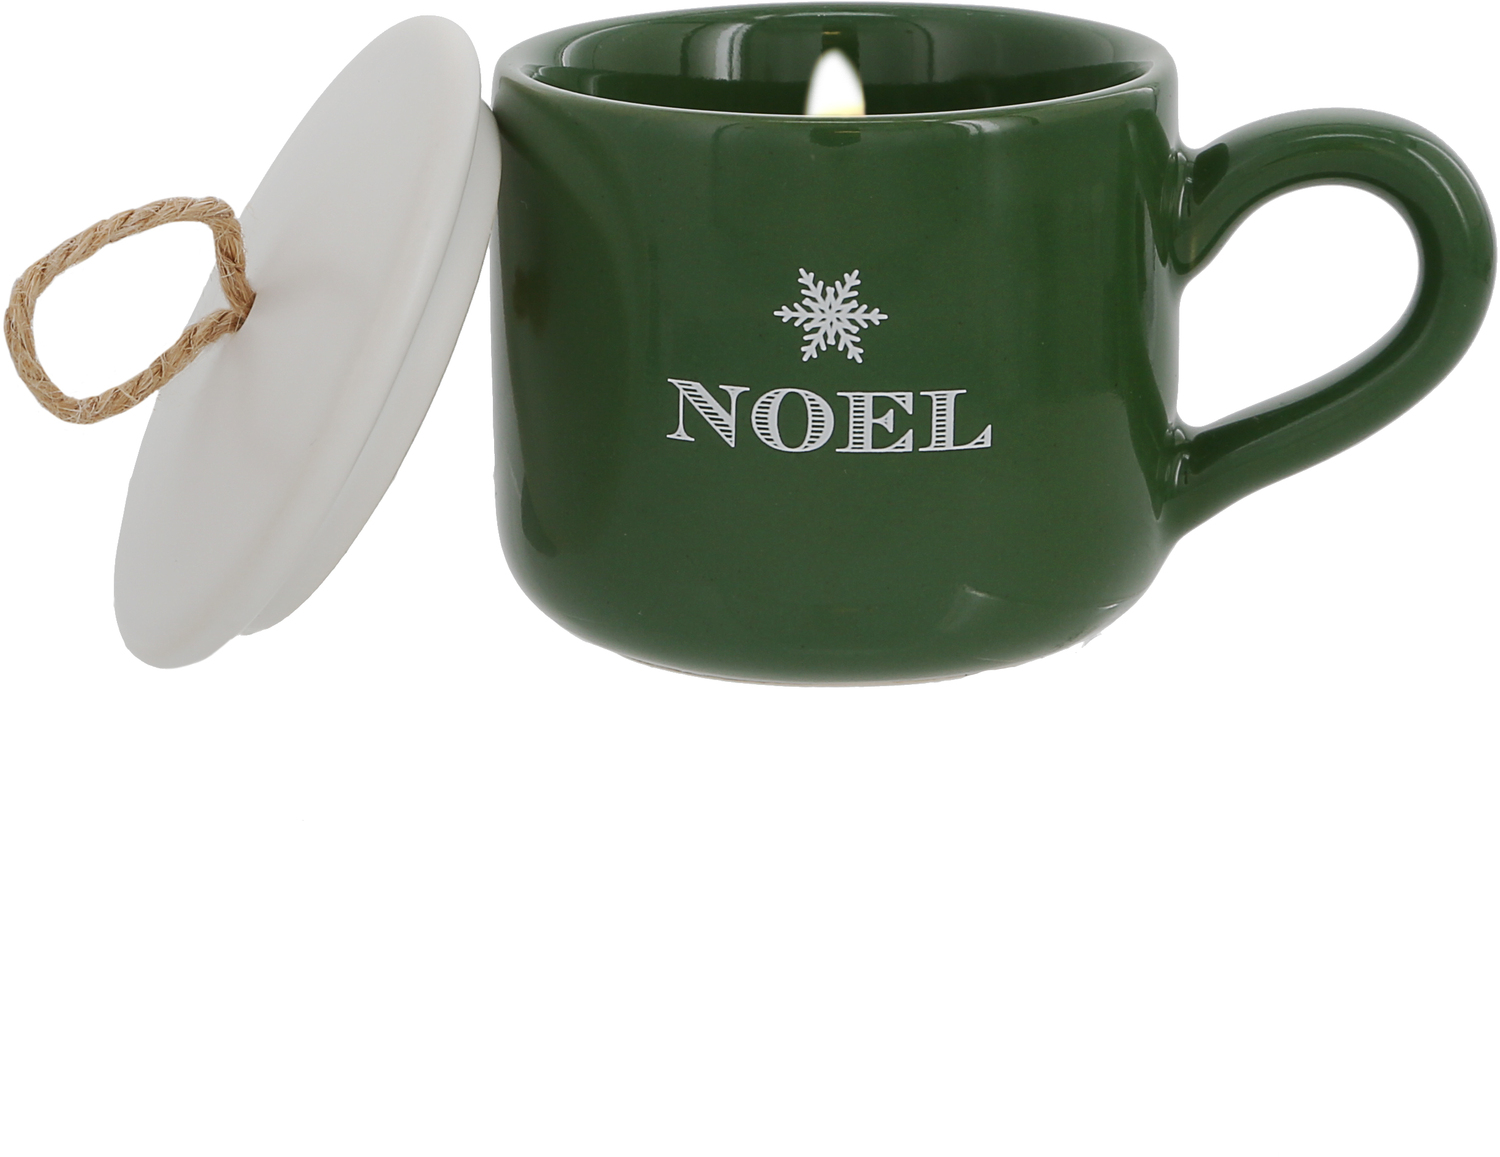 Noel by Filled with Warmth - Noel - 2 oz Mini Mug 100% Soy Wax Candle
Scent: Balsam Fir